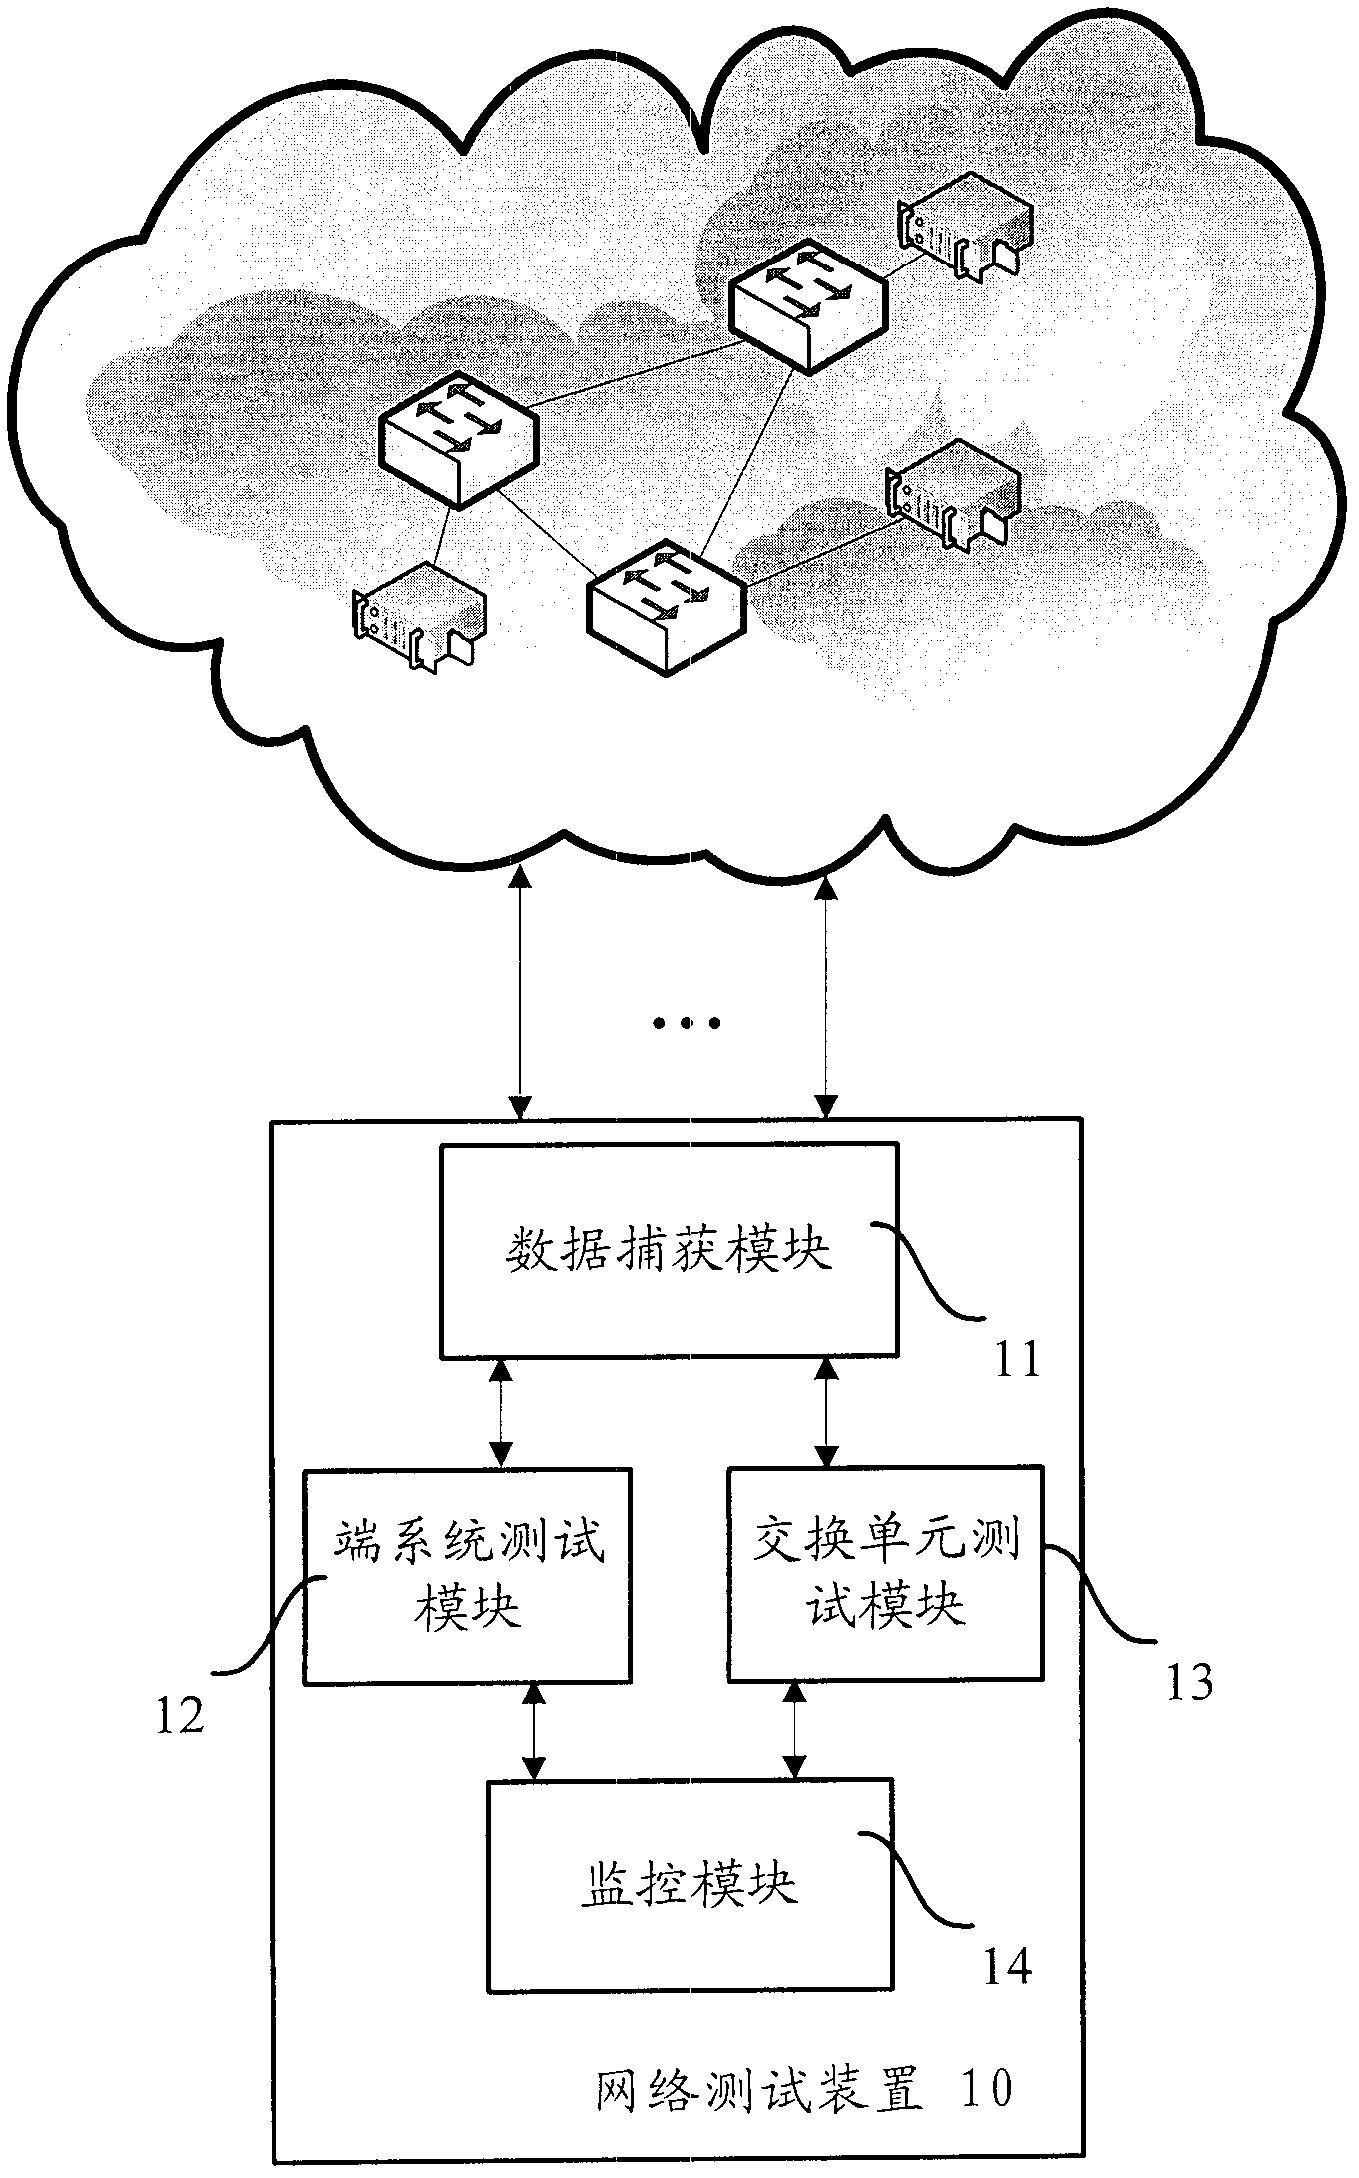 Network testing device